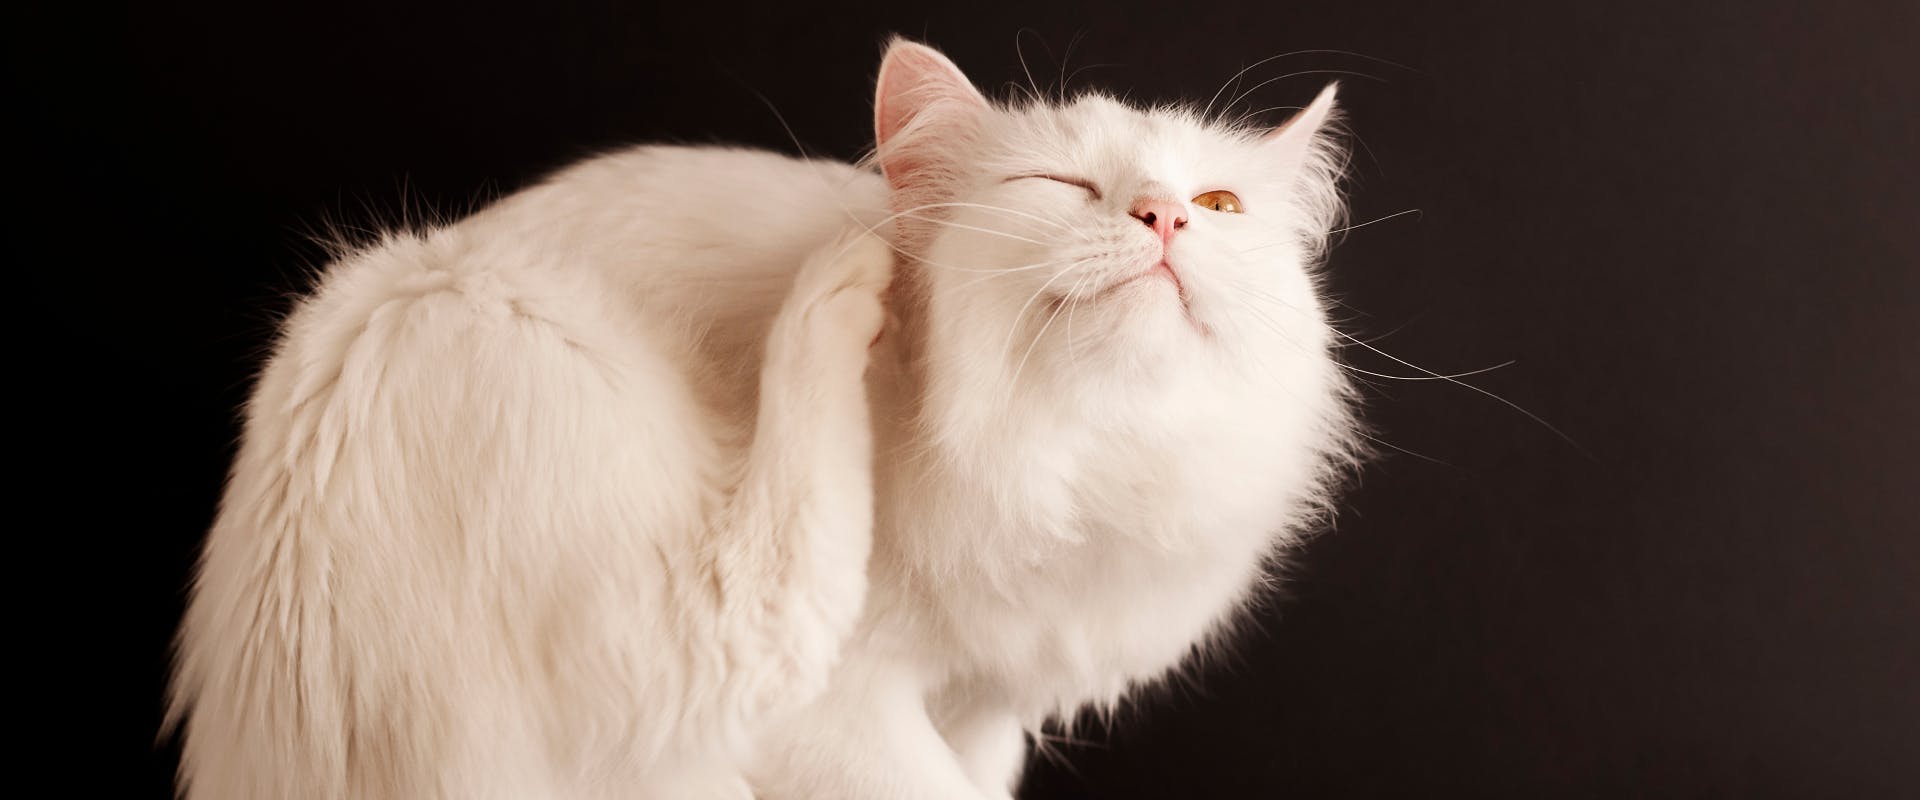 long haired white domestic cat scratching its ear